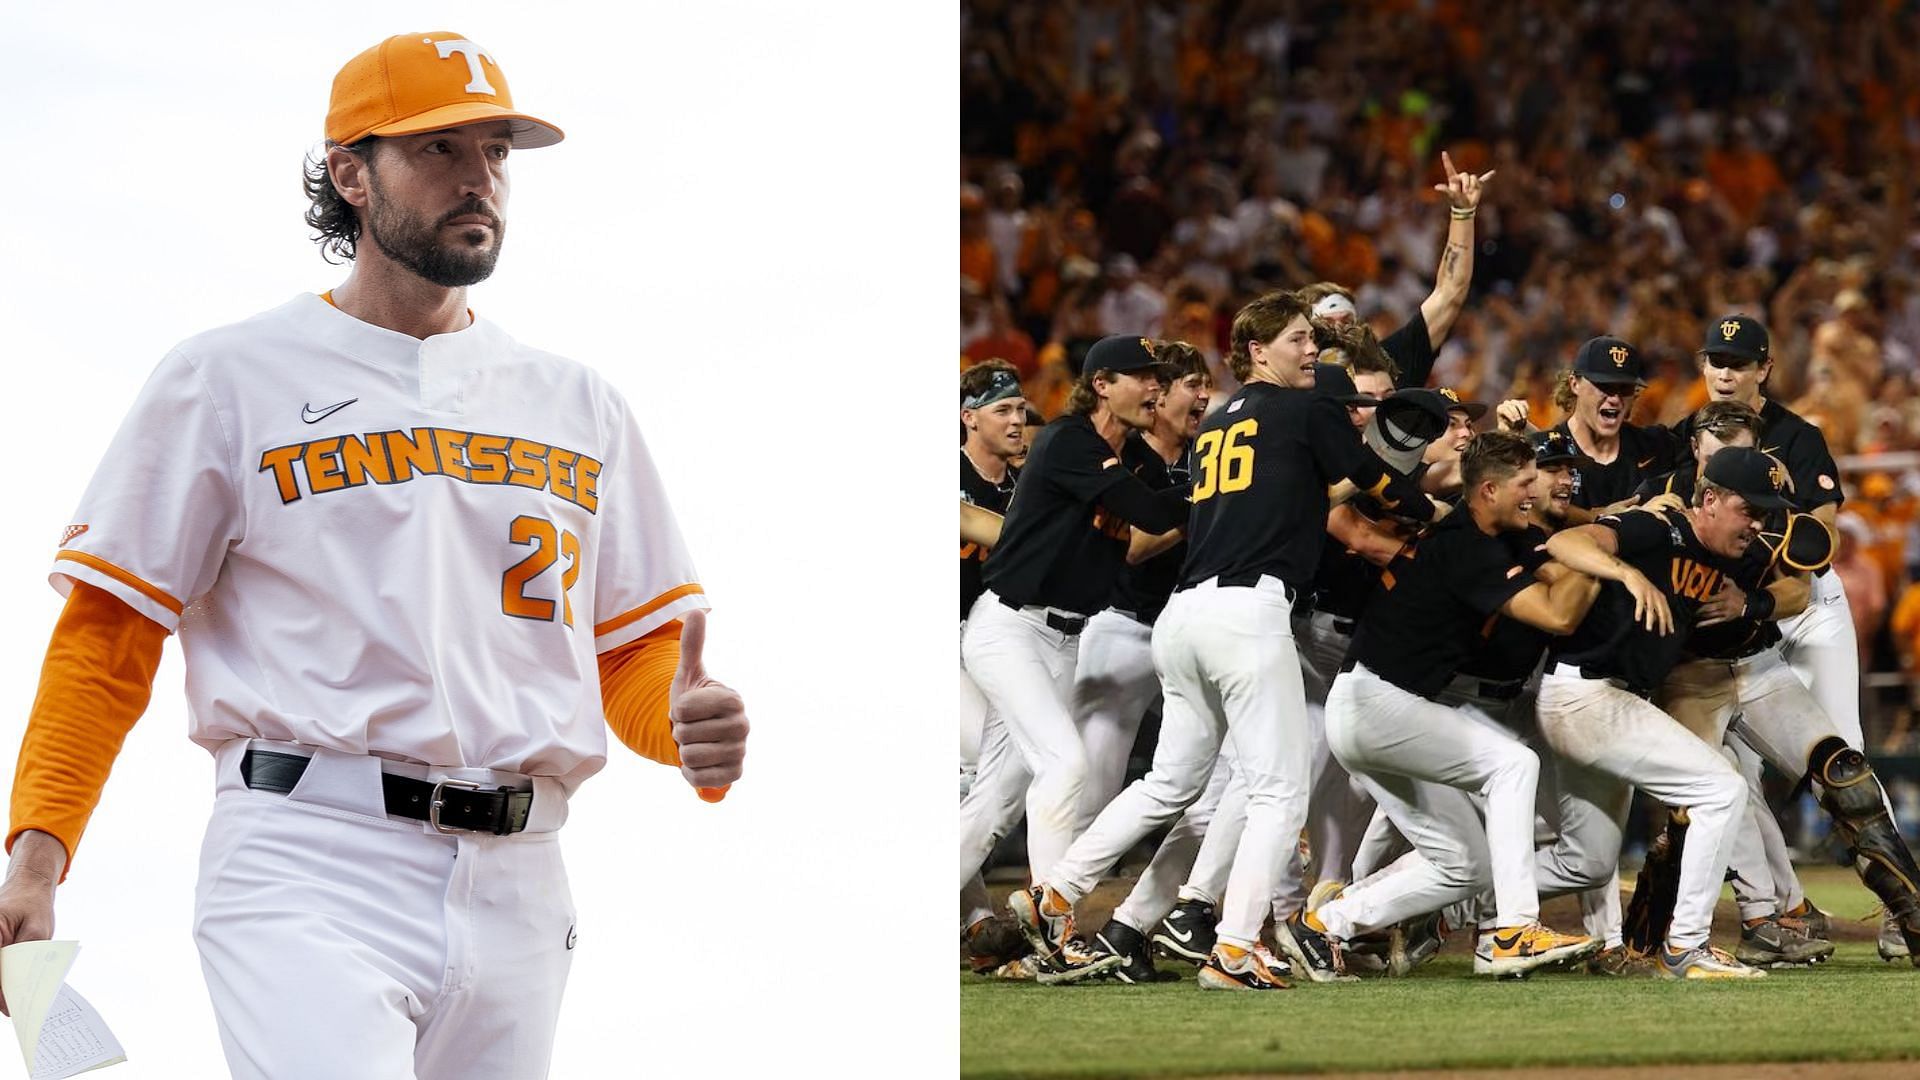 Images courtesy of Tennessee Athletics and NCAA 